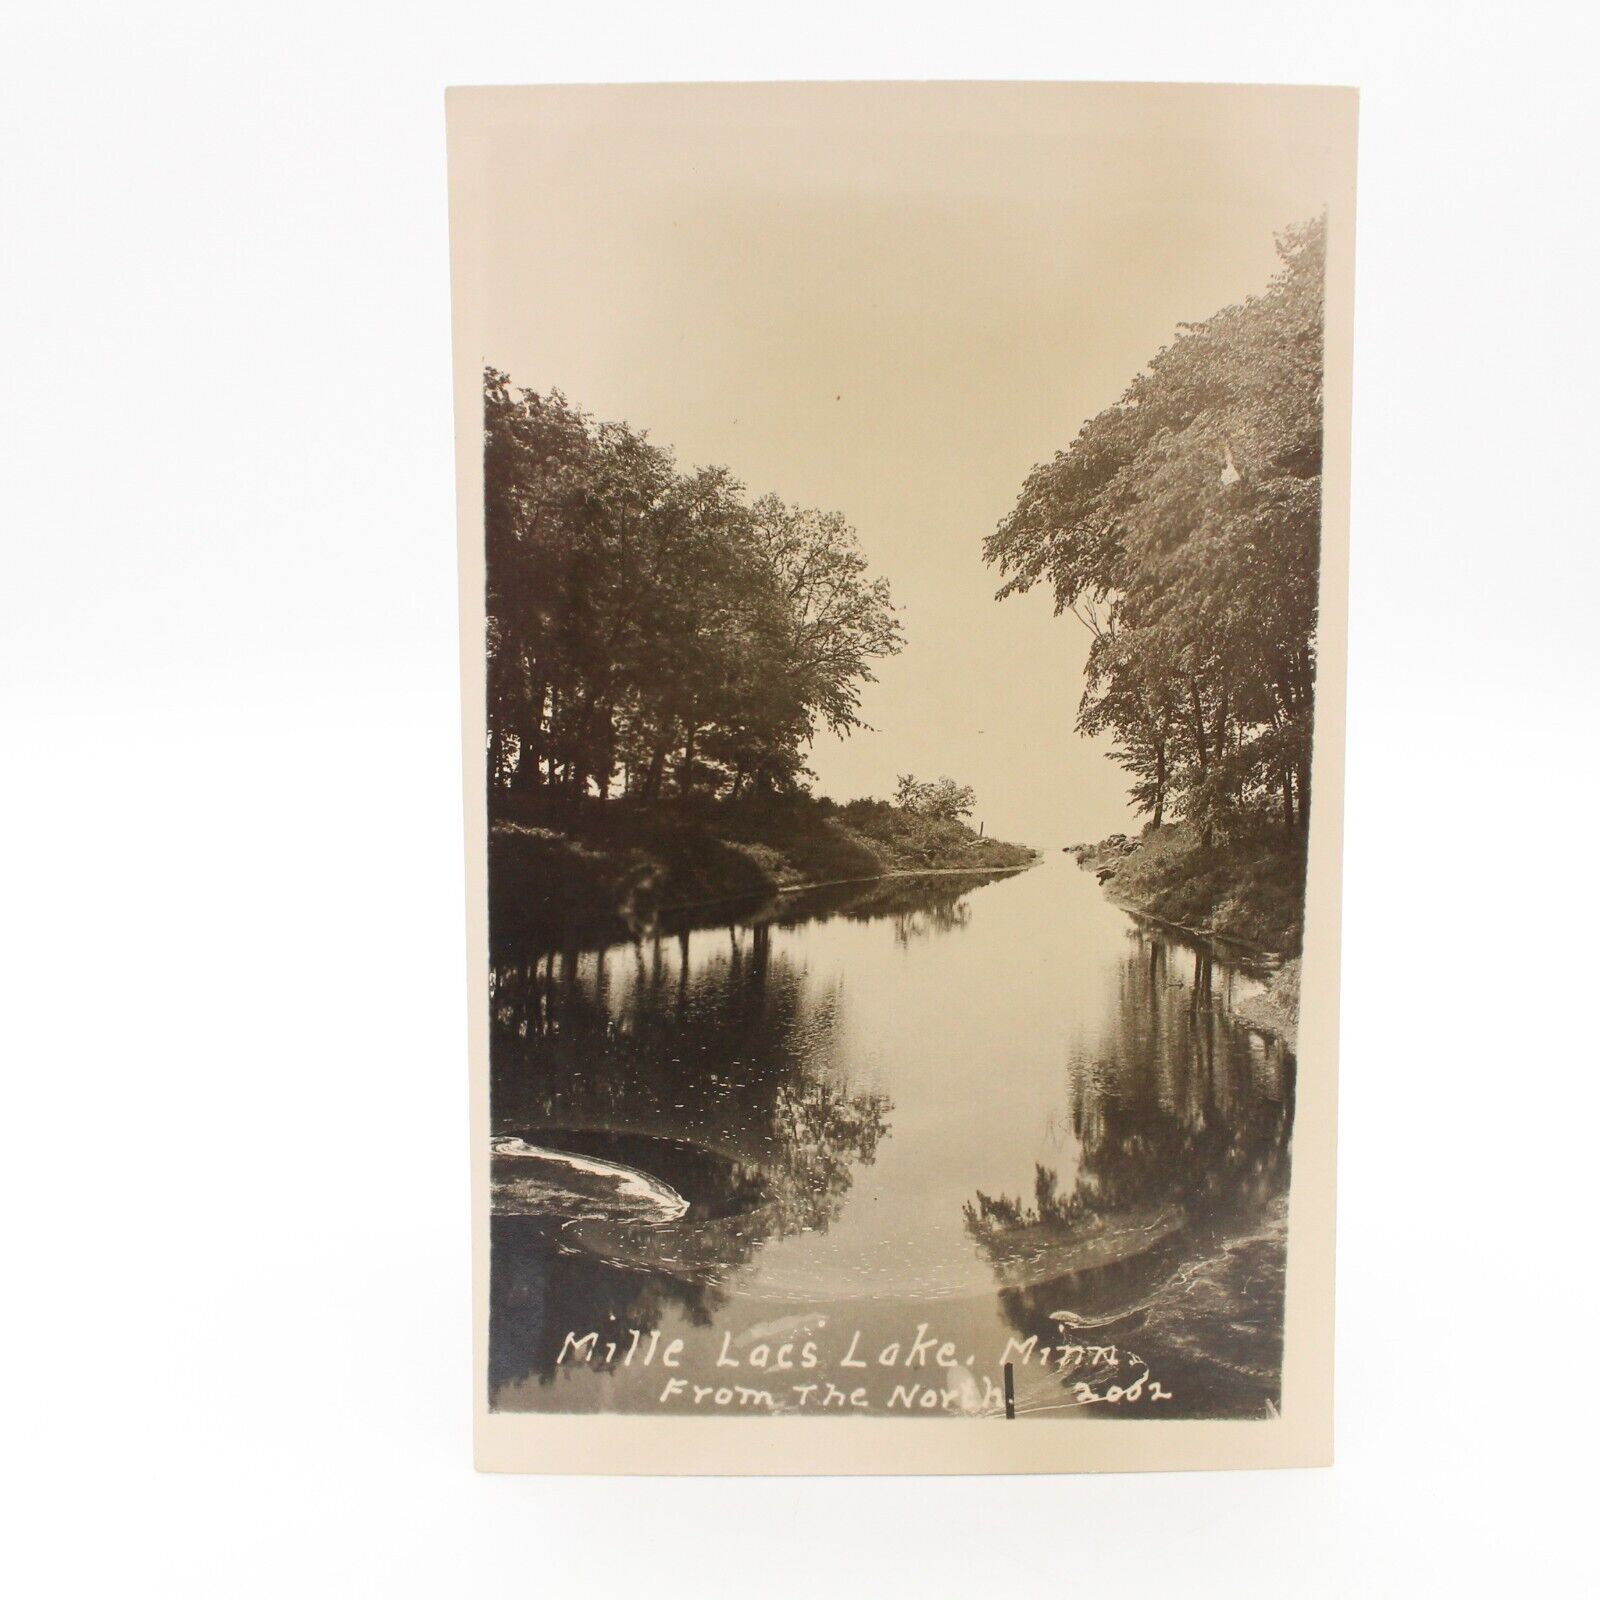 RPPC Photo Postcard Mille Lacs Lake MN Minnesota from the North Unposted